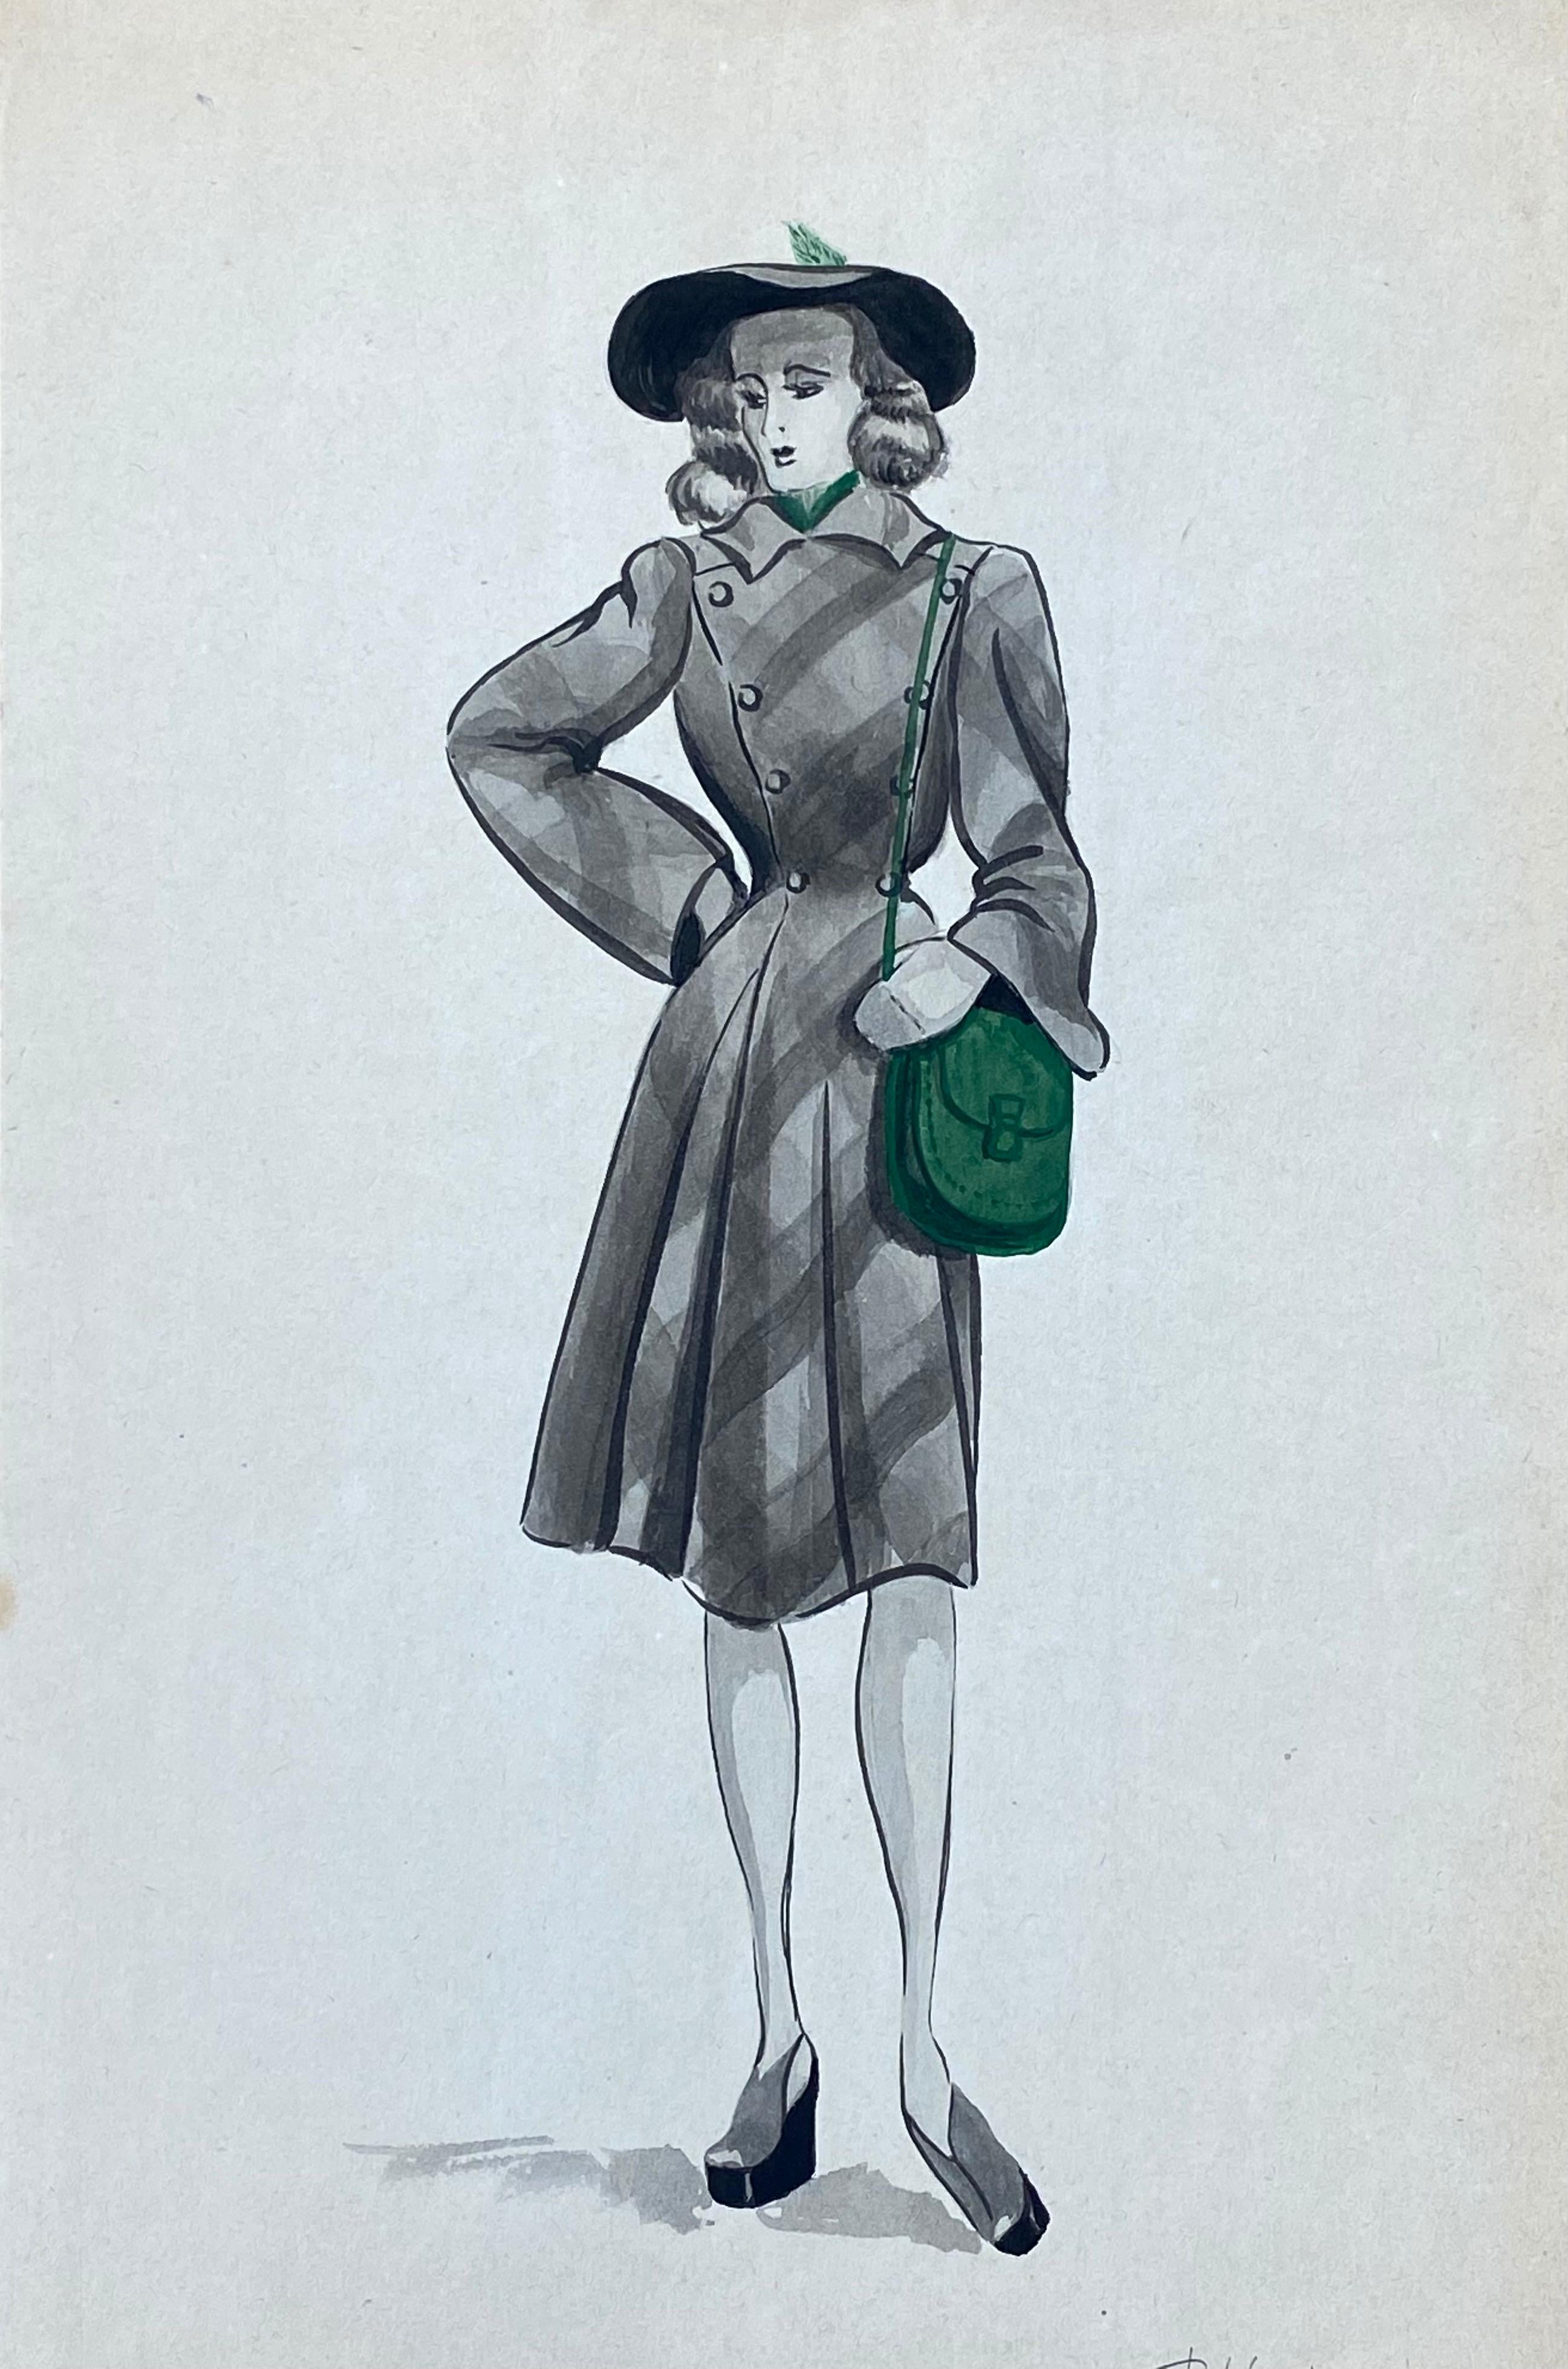 Geneviève Thomas Portrait - 1940's French Fashion Illustration - The Stylish Lady With The Green Features